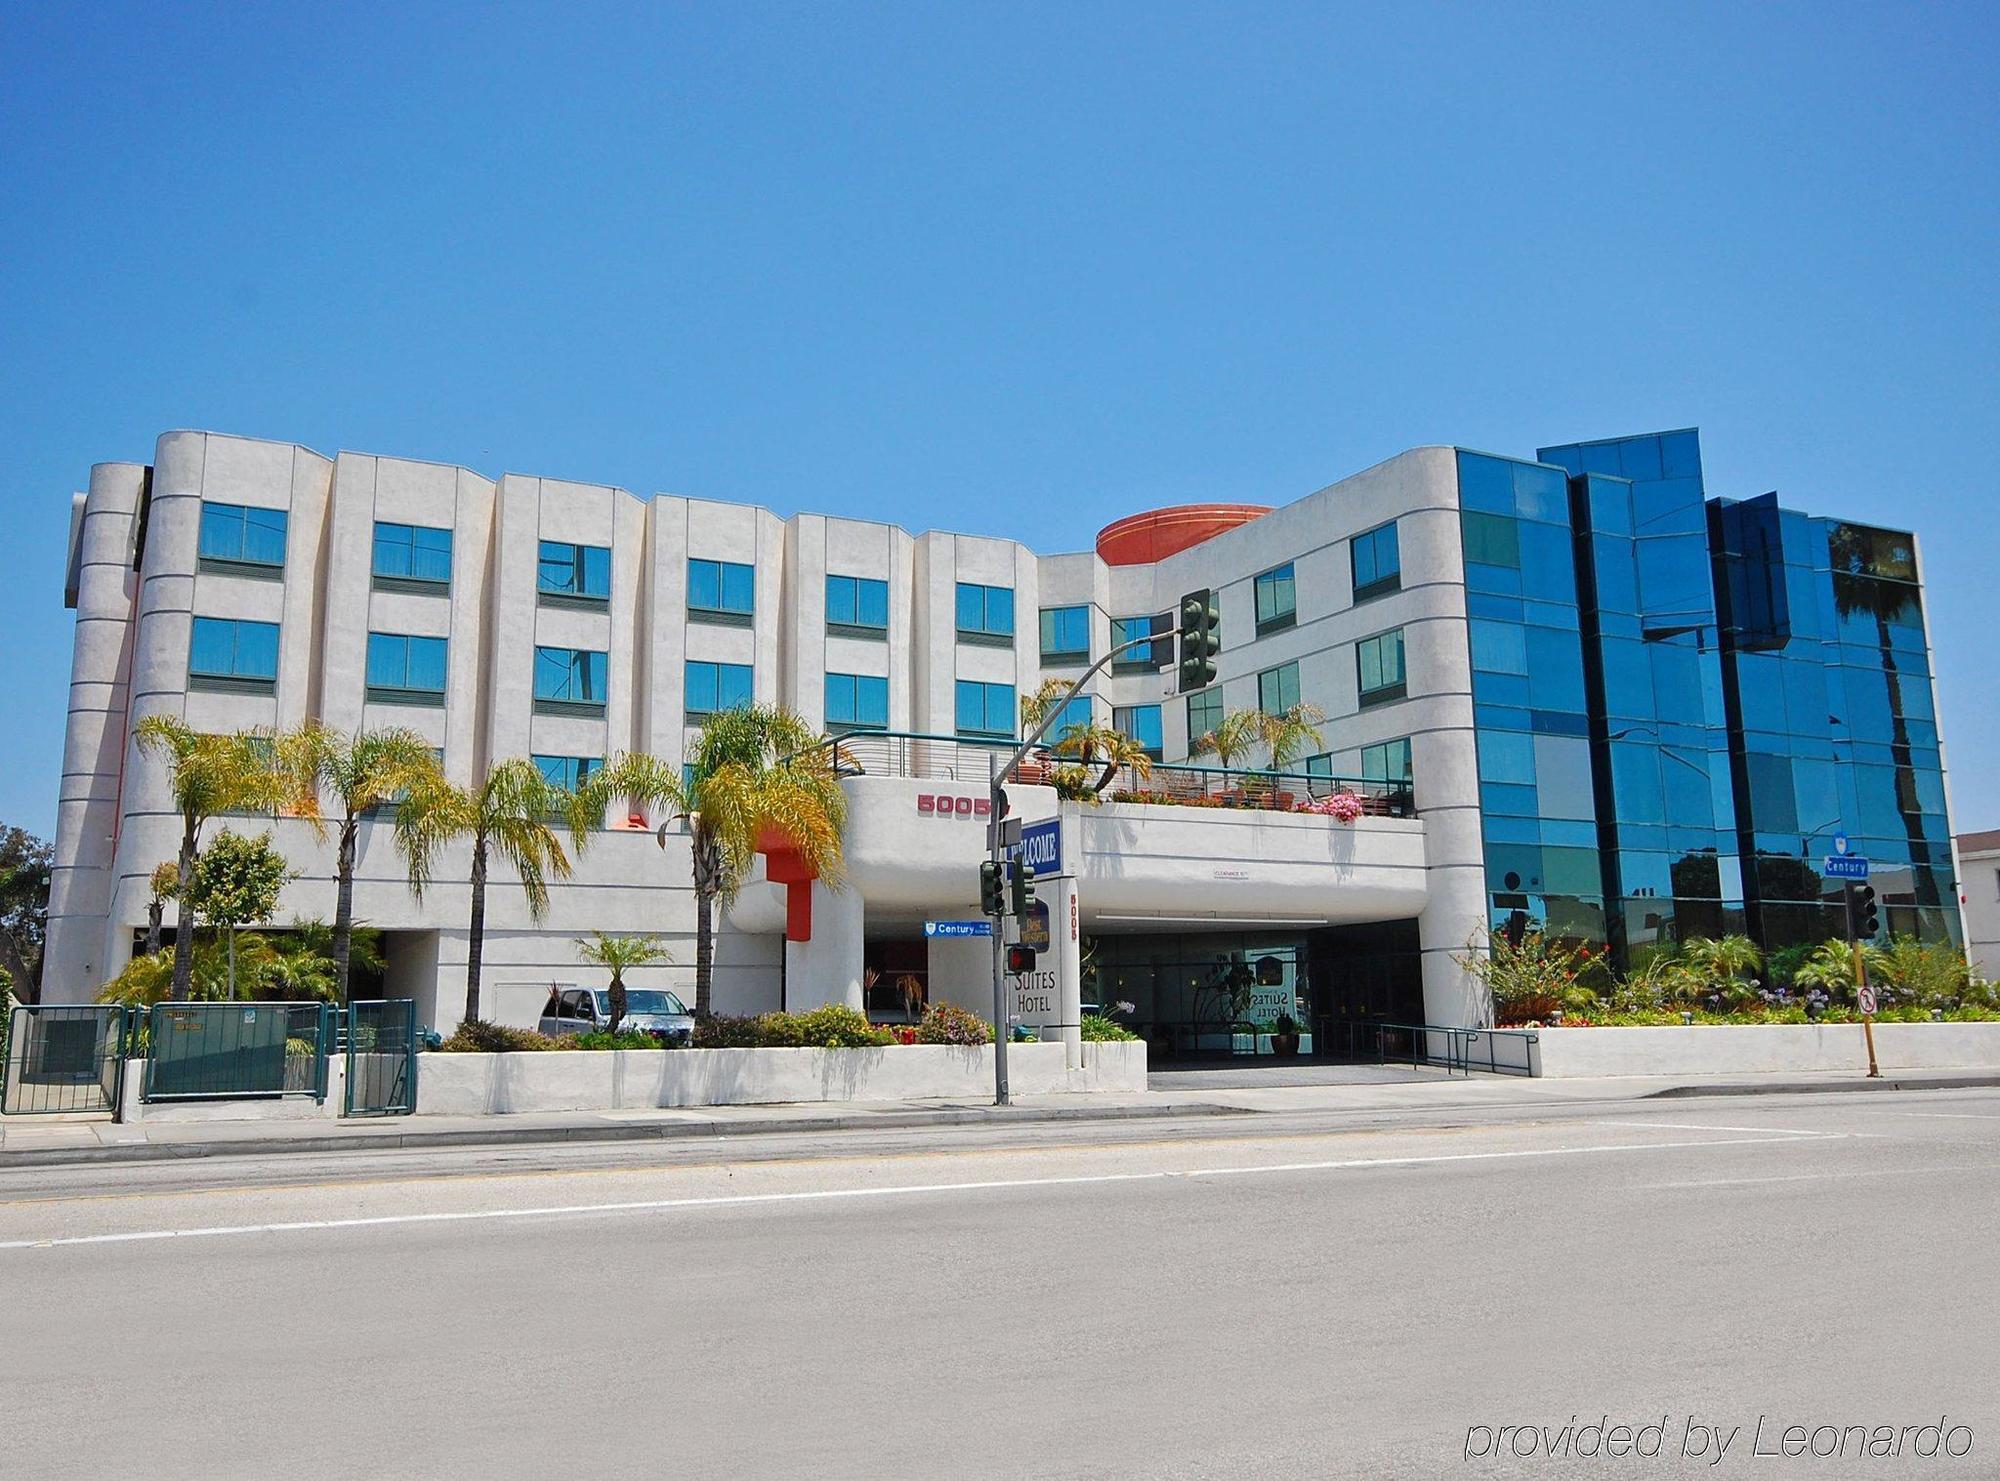 Best Western Plus Suites Hotel - Los Angeles Lax Airport Інґлвуд Екстер'єр фото